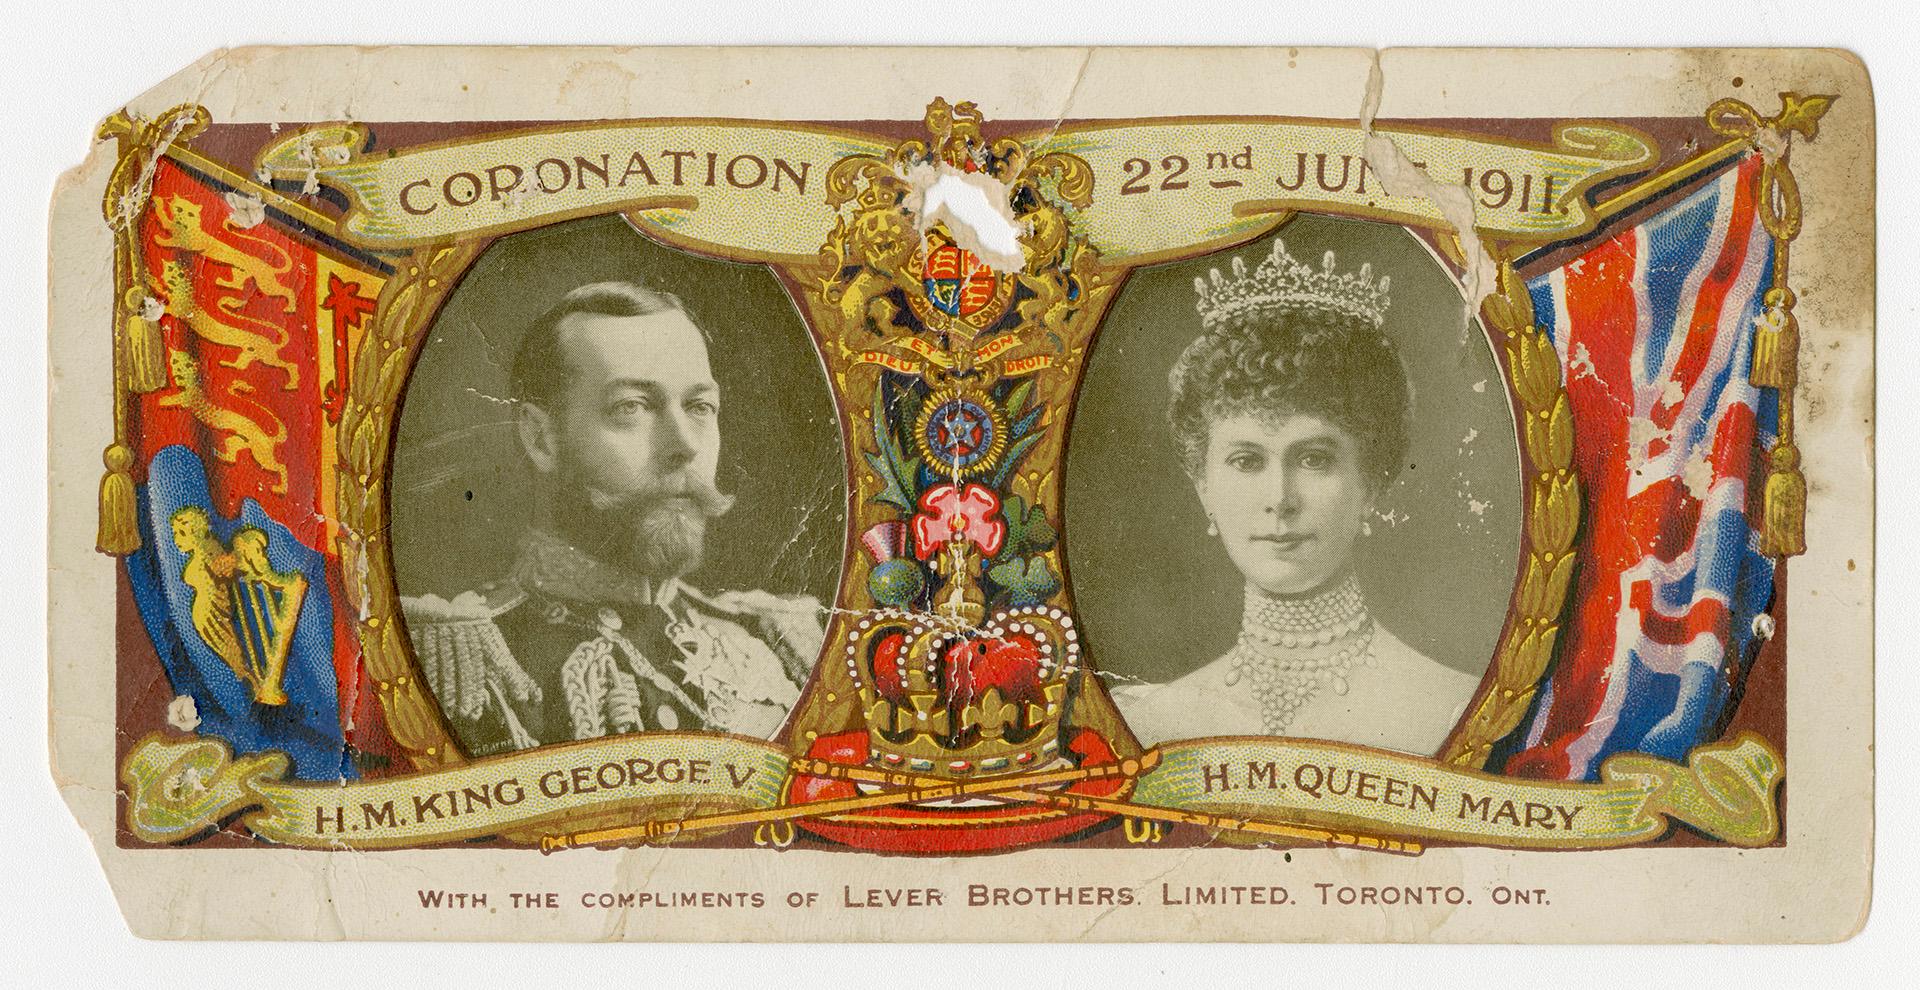 Photo portraits of King George V, and Queen Mary. The Union Jack flag and Royal Standard (outsi ...